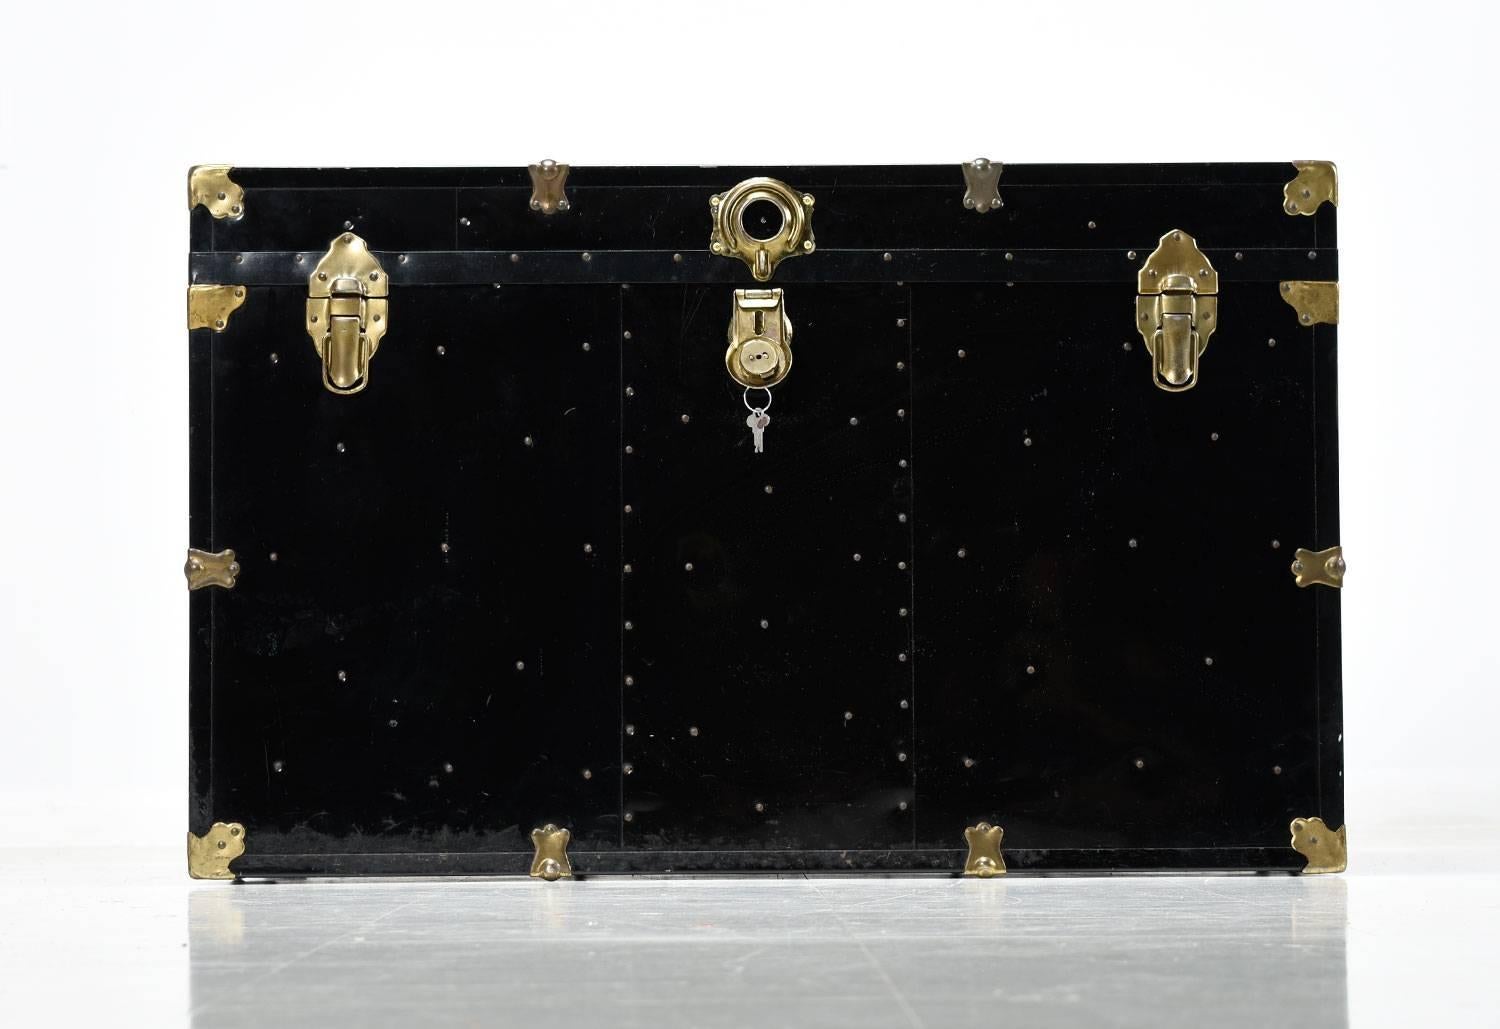 Vintage black enamel over metal steamer trunk accented with leather strap handles and gold colored latches. Open the trunk to reveal removal storage trays at top. The interior is a radiant blue. The trunk comes with a key.